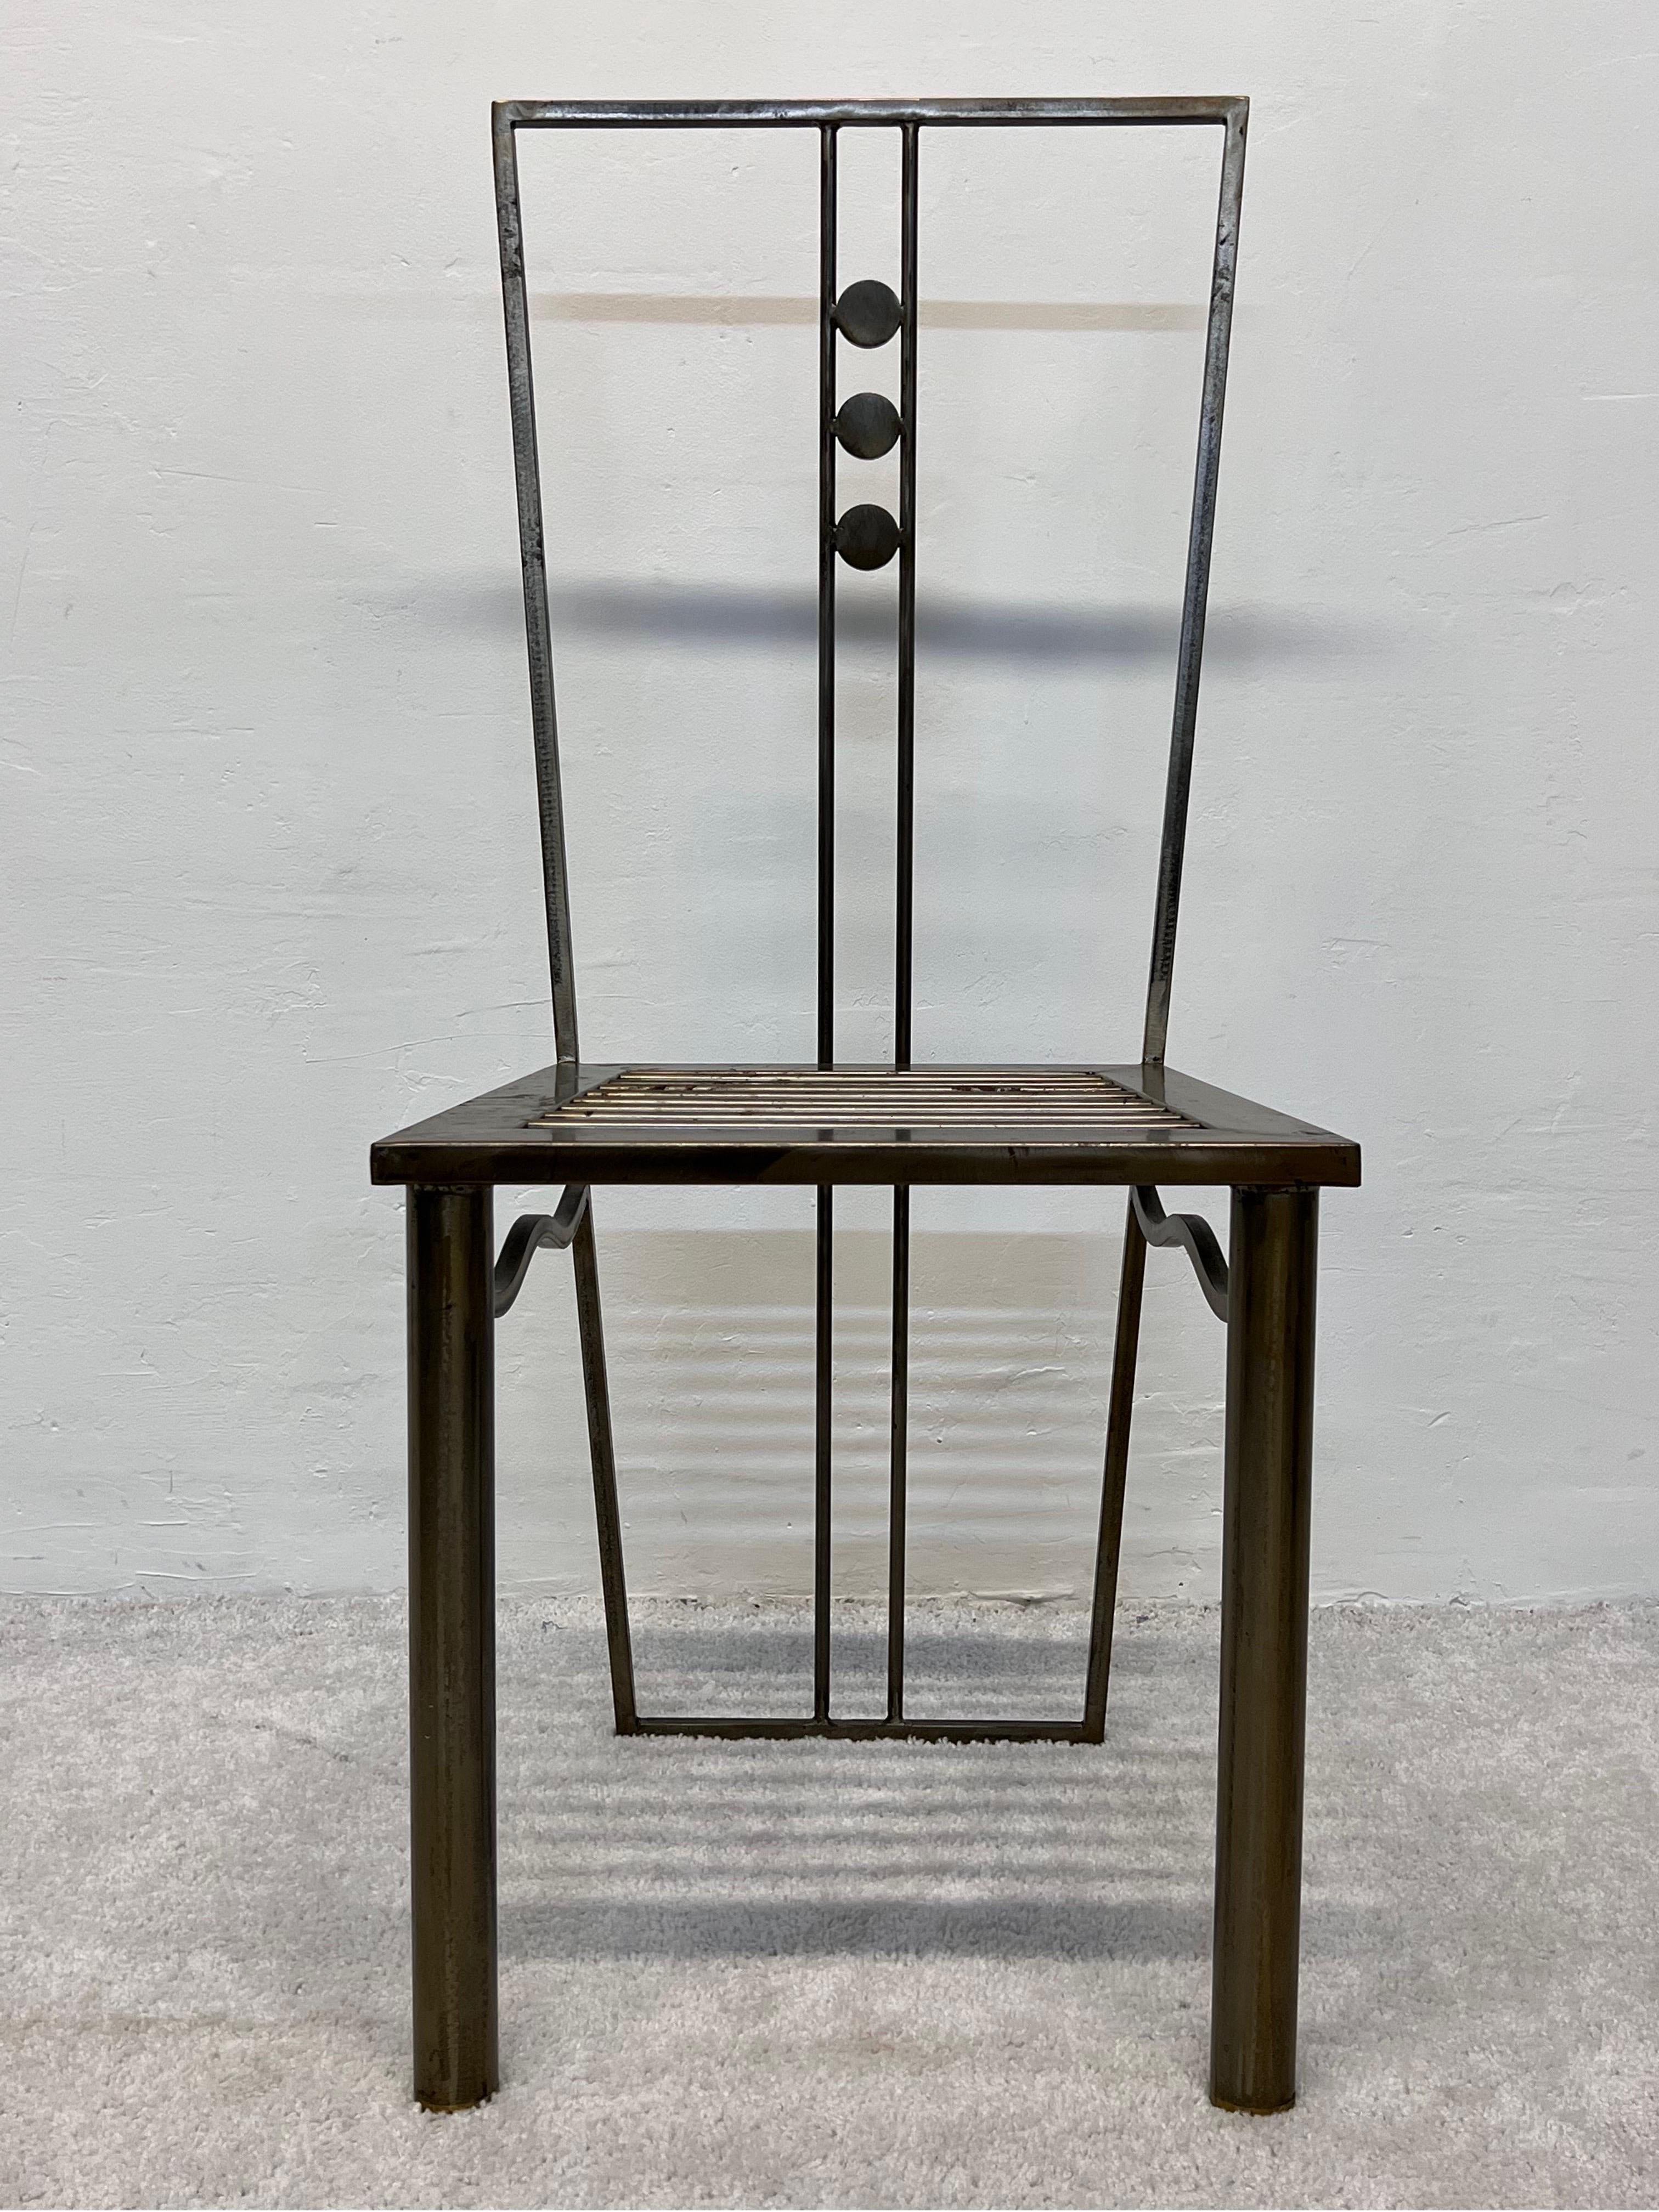 Postmodern Sculptural Studio Crafted Steel Dining or Side Chair, 1990s For Sale 6